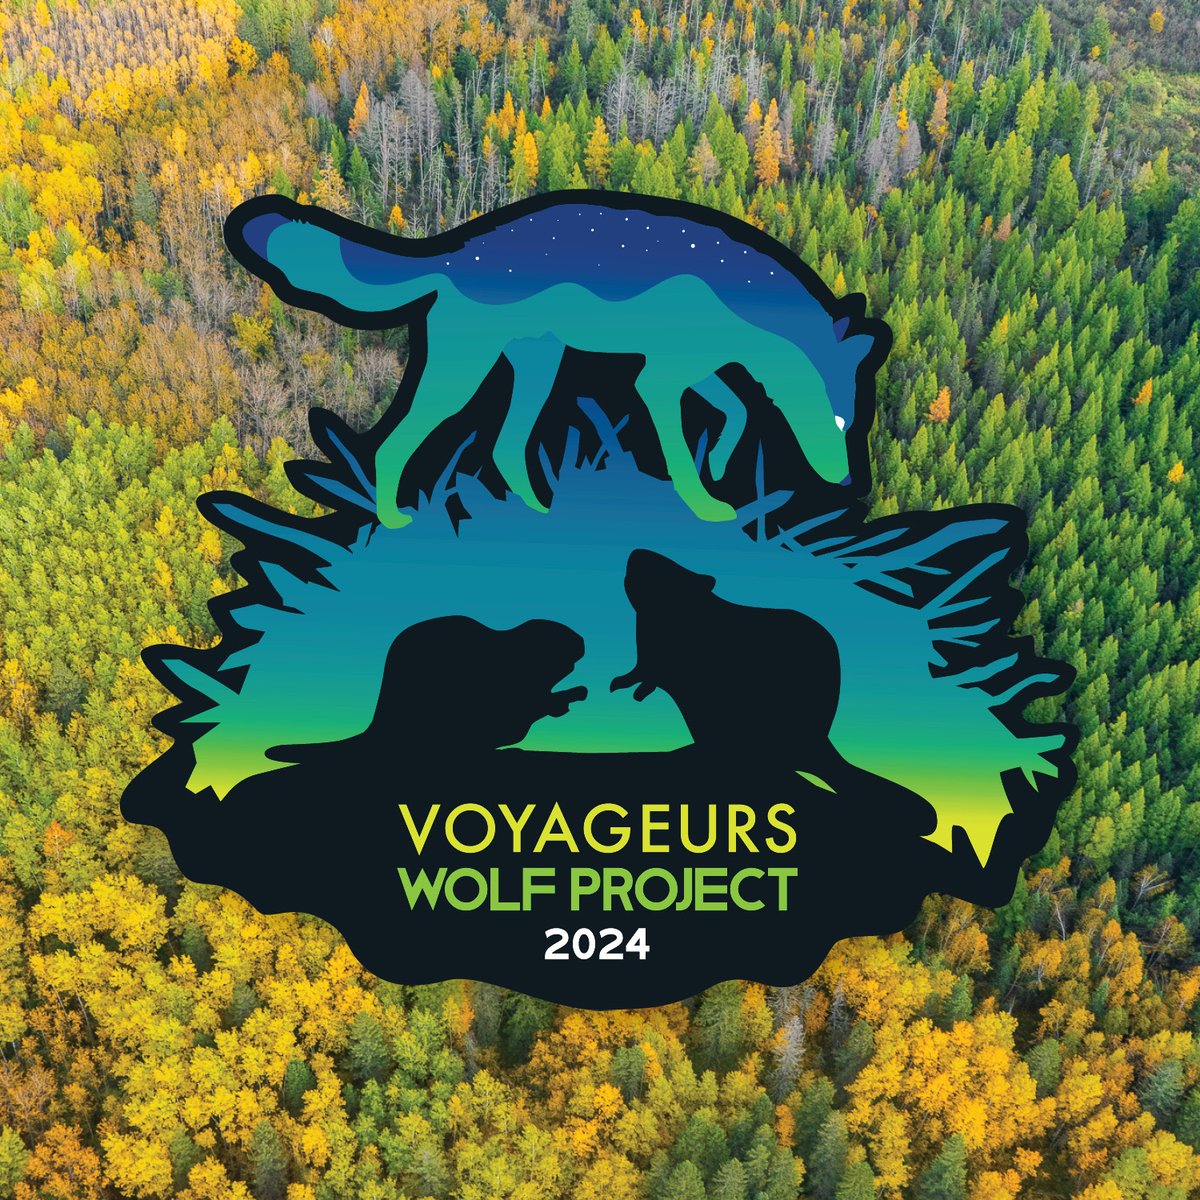 Introducing the 2024 VWP sticker—the most unique wolf sticker you have ever seen! Anyone who donates (link to donate below) to our annual spring fundraiser that we just launched will get this sticker as a token of our thanks!